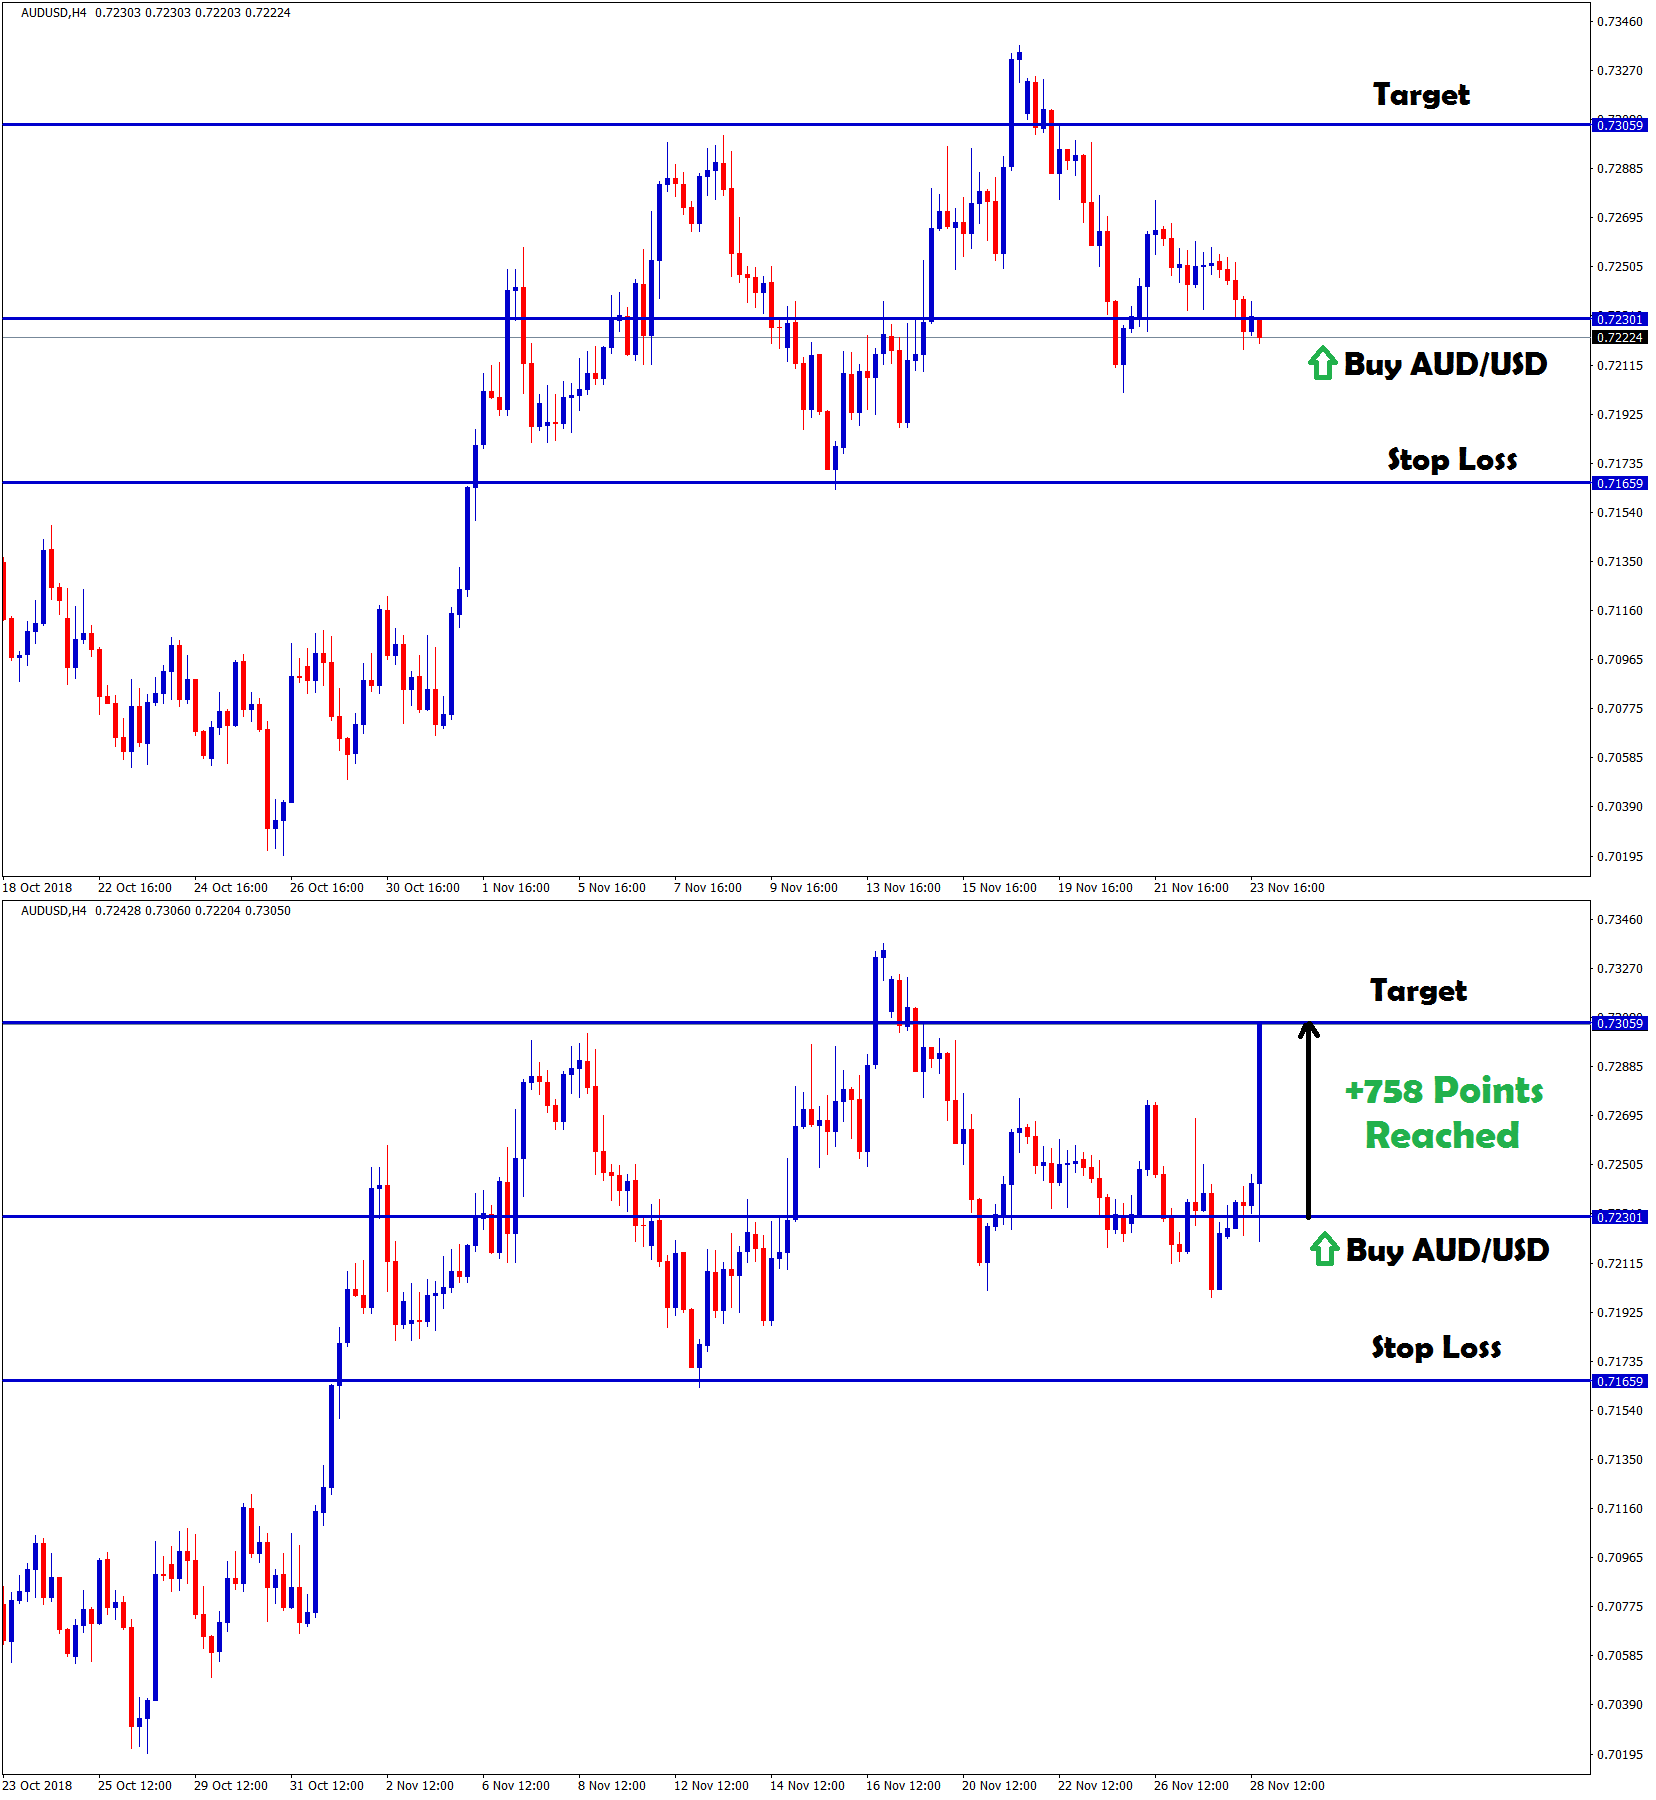 target hits with +758 points in aud/usd